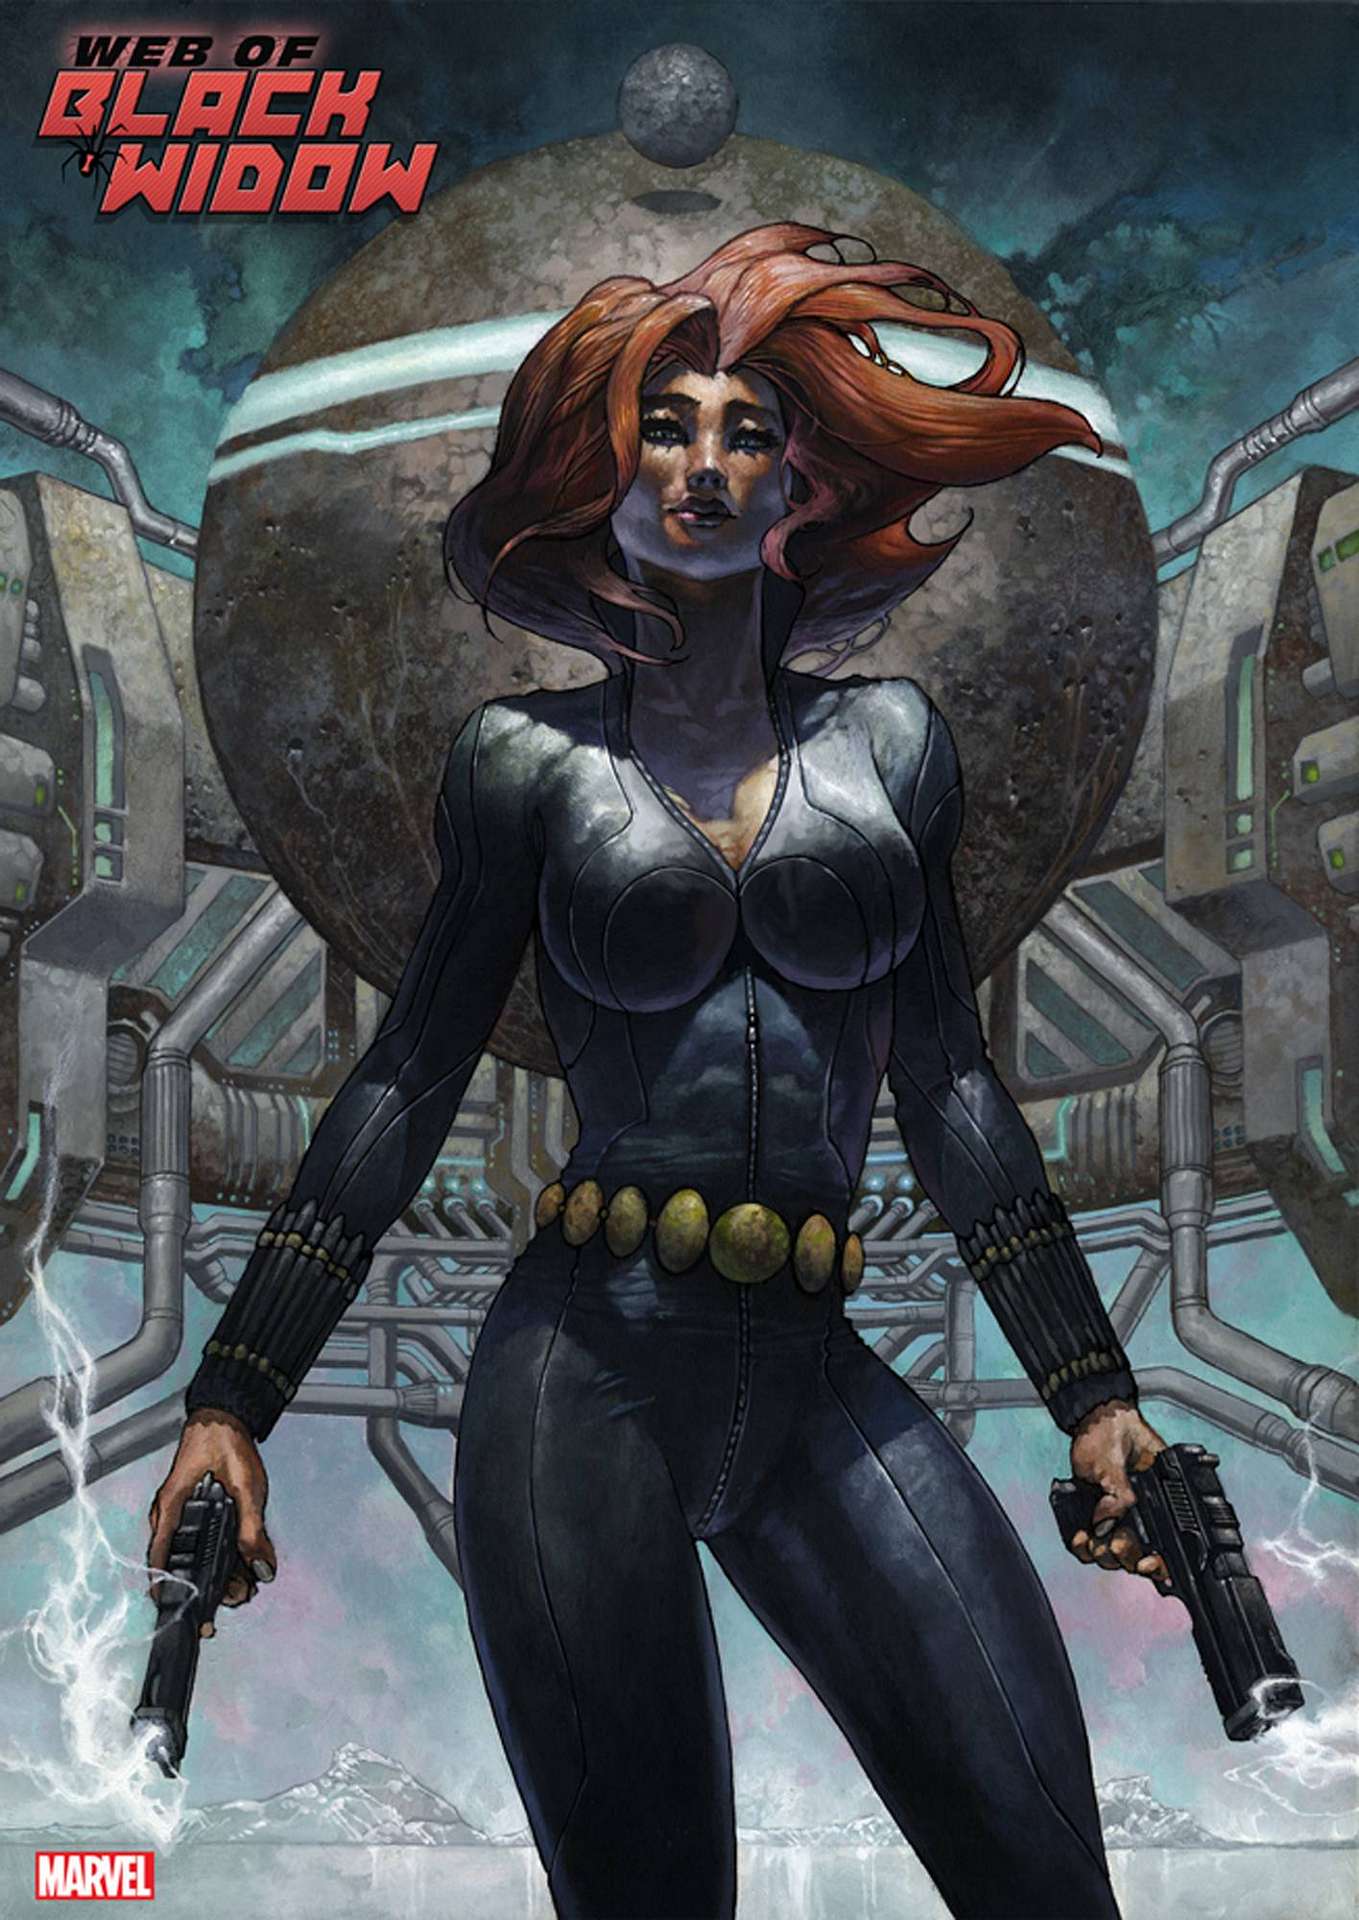 WEB OF BLACK WIDOW #5 (OF 5) BIANCHI VARIANT